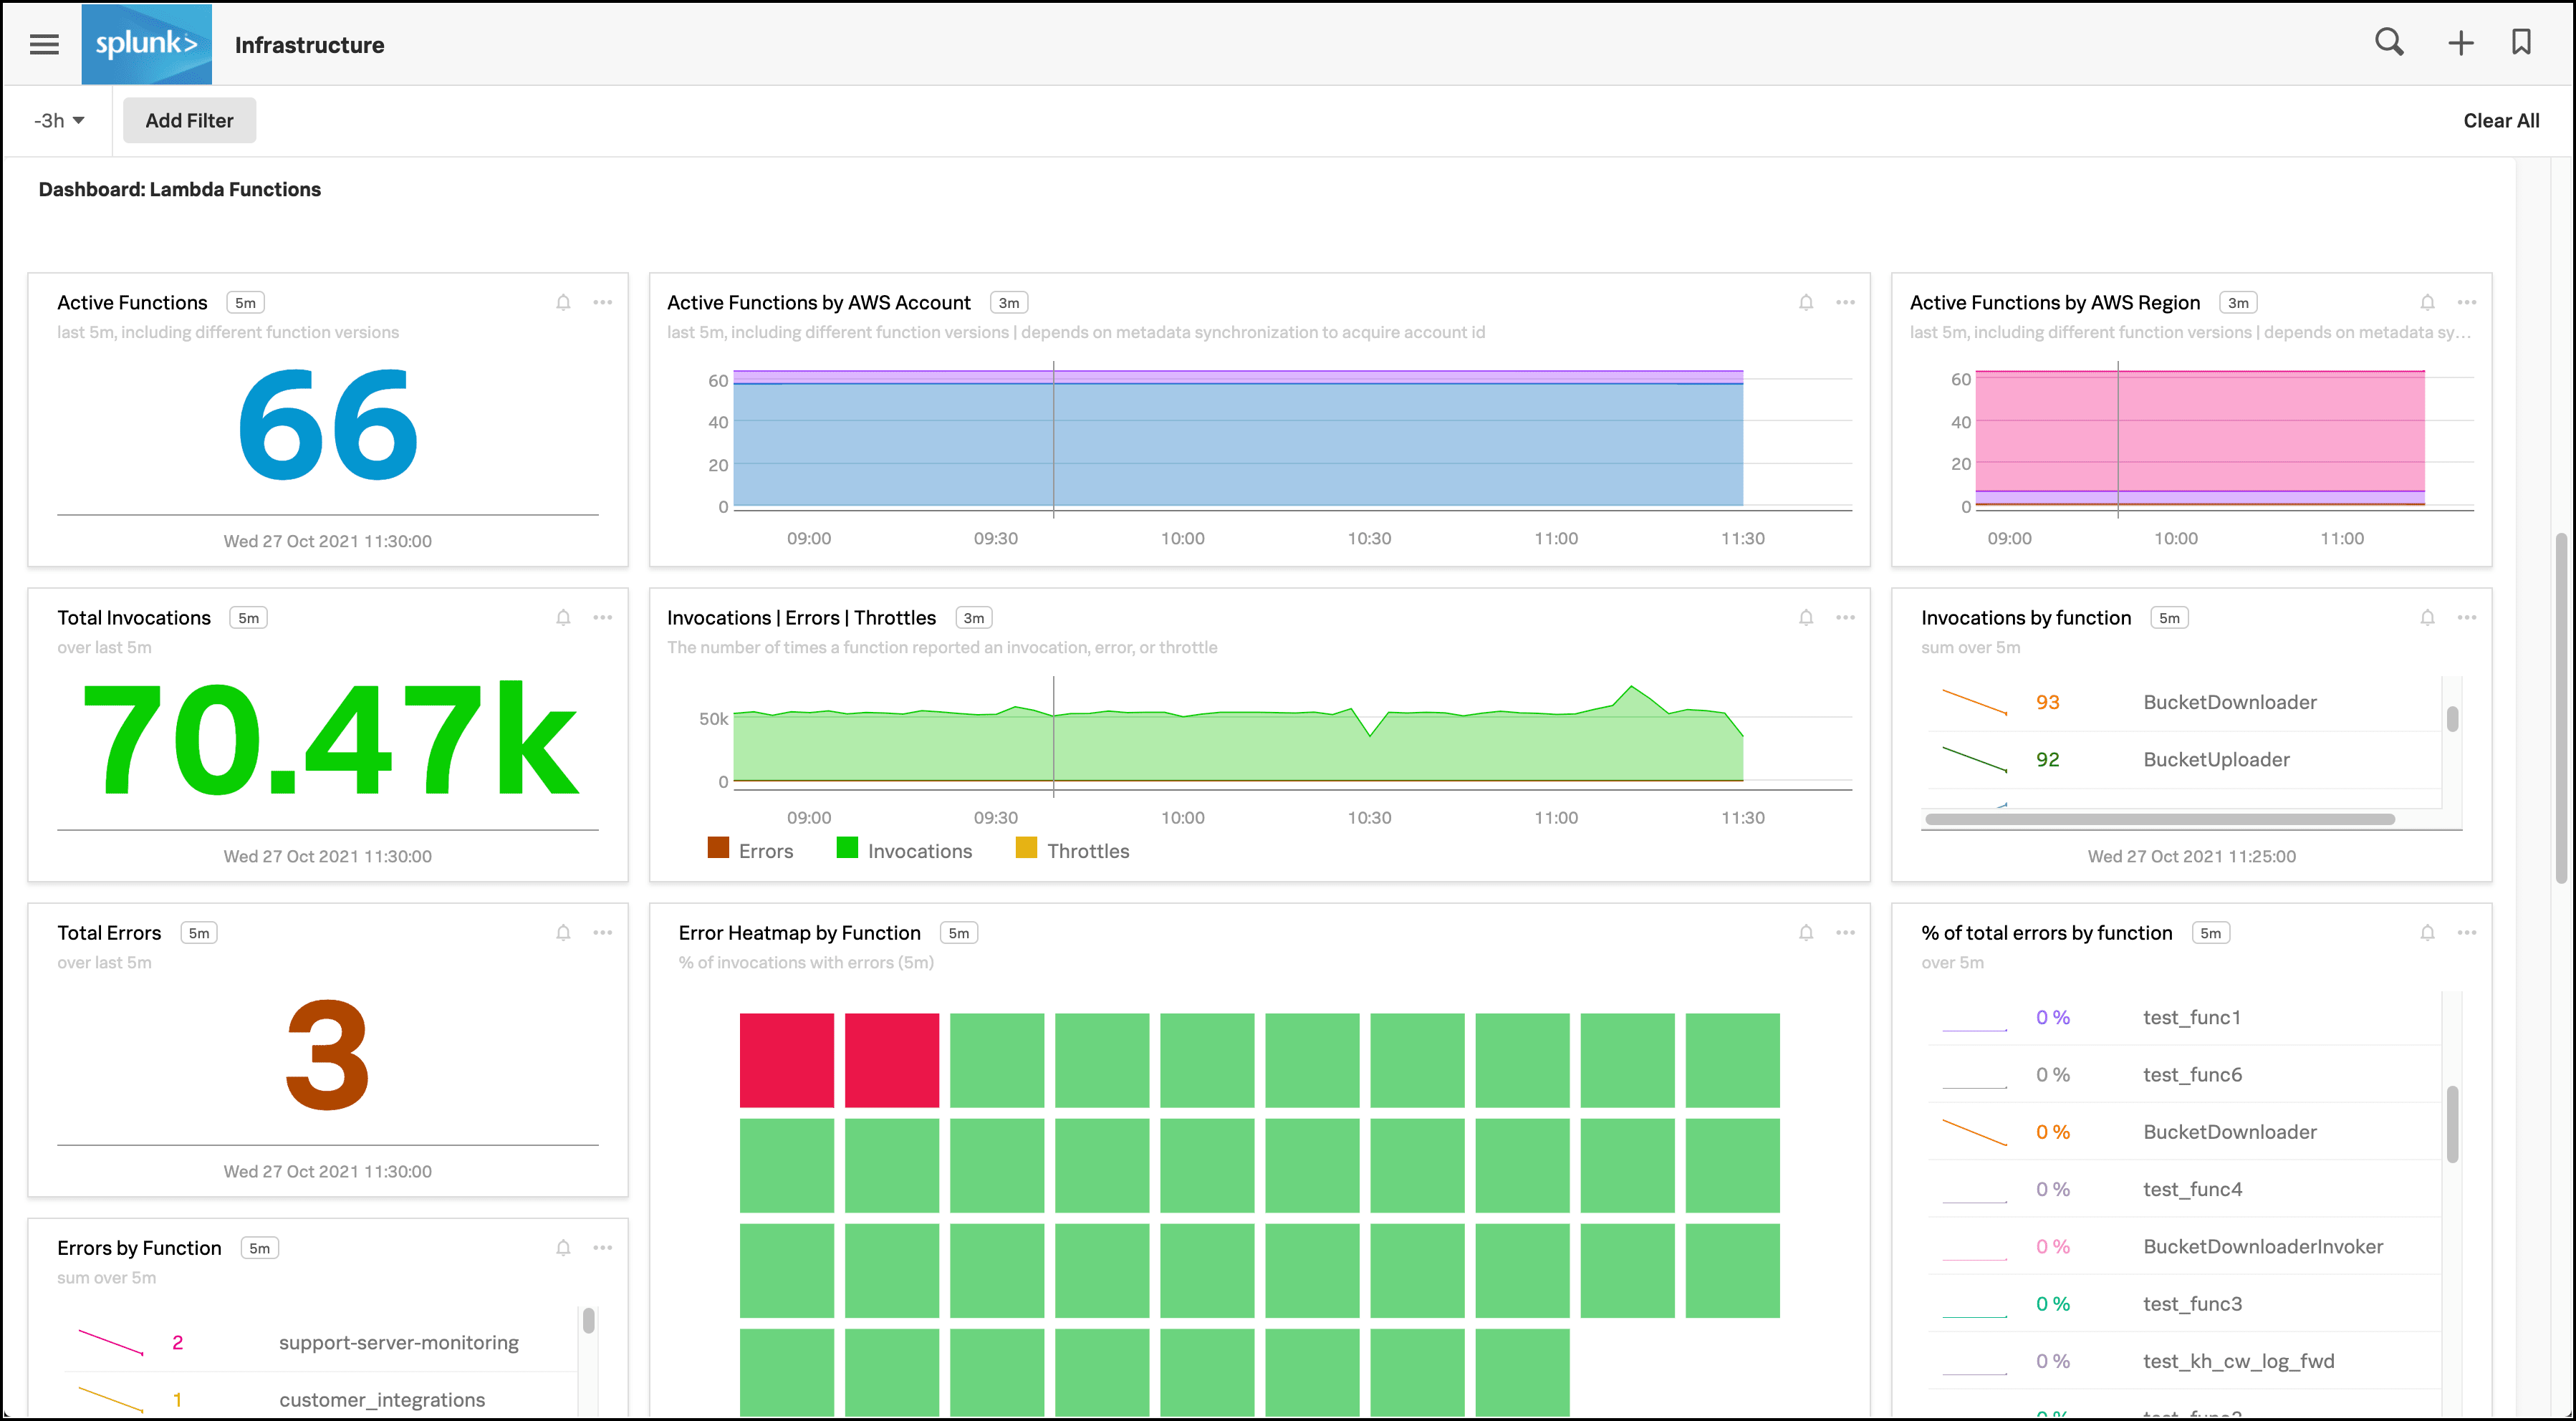 This screenshot shows the Lambda Functions navigator in Splunk Infrastructure Monitoring displaying charts and visualizations of data collected from serverless functions.